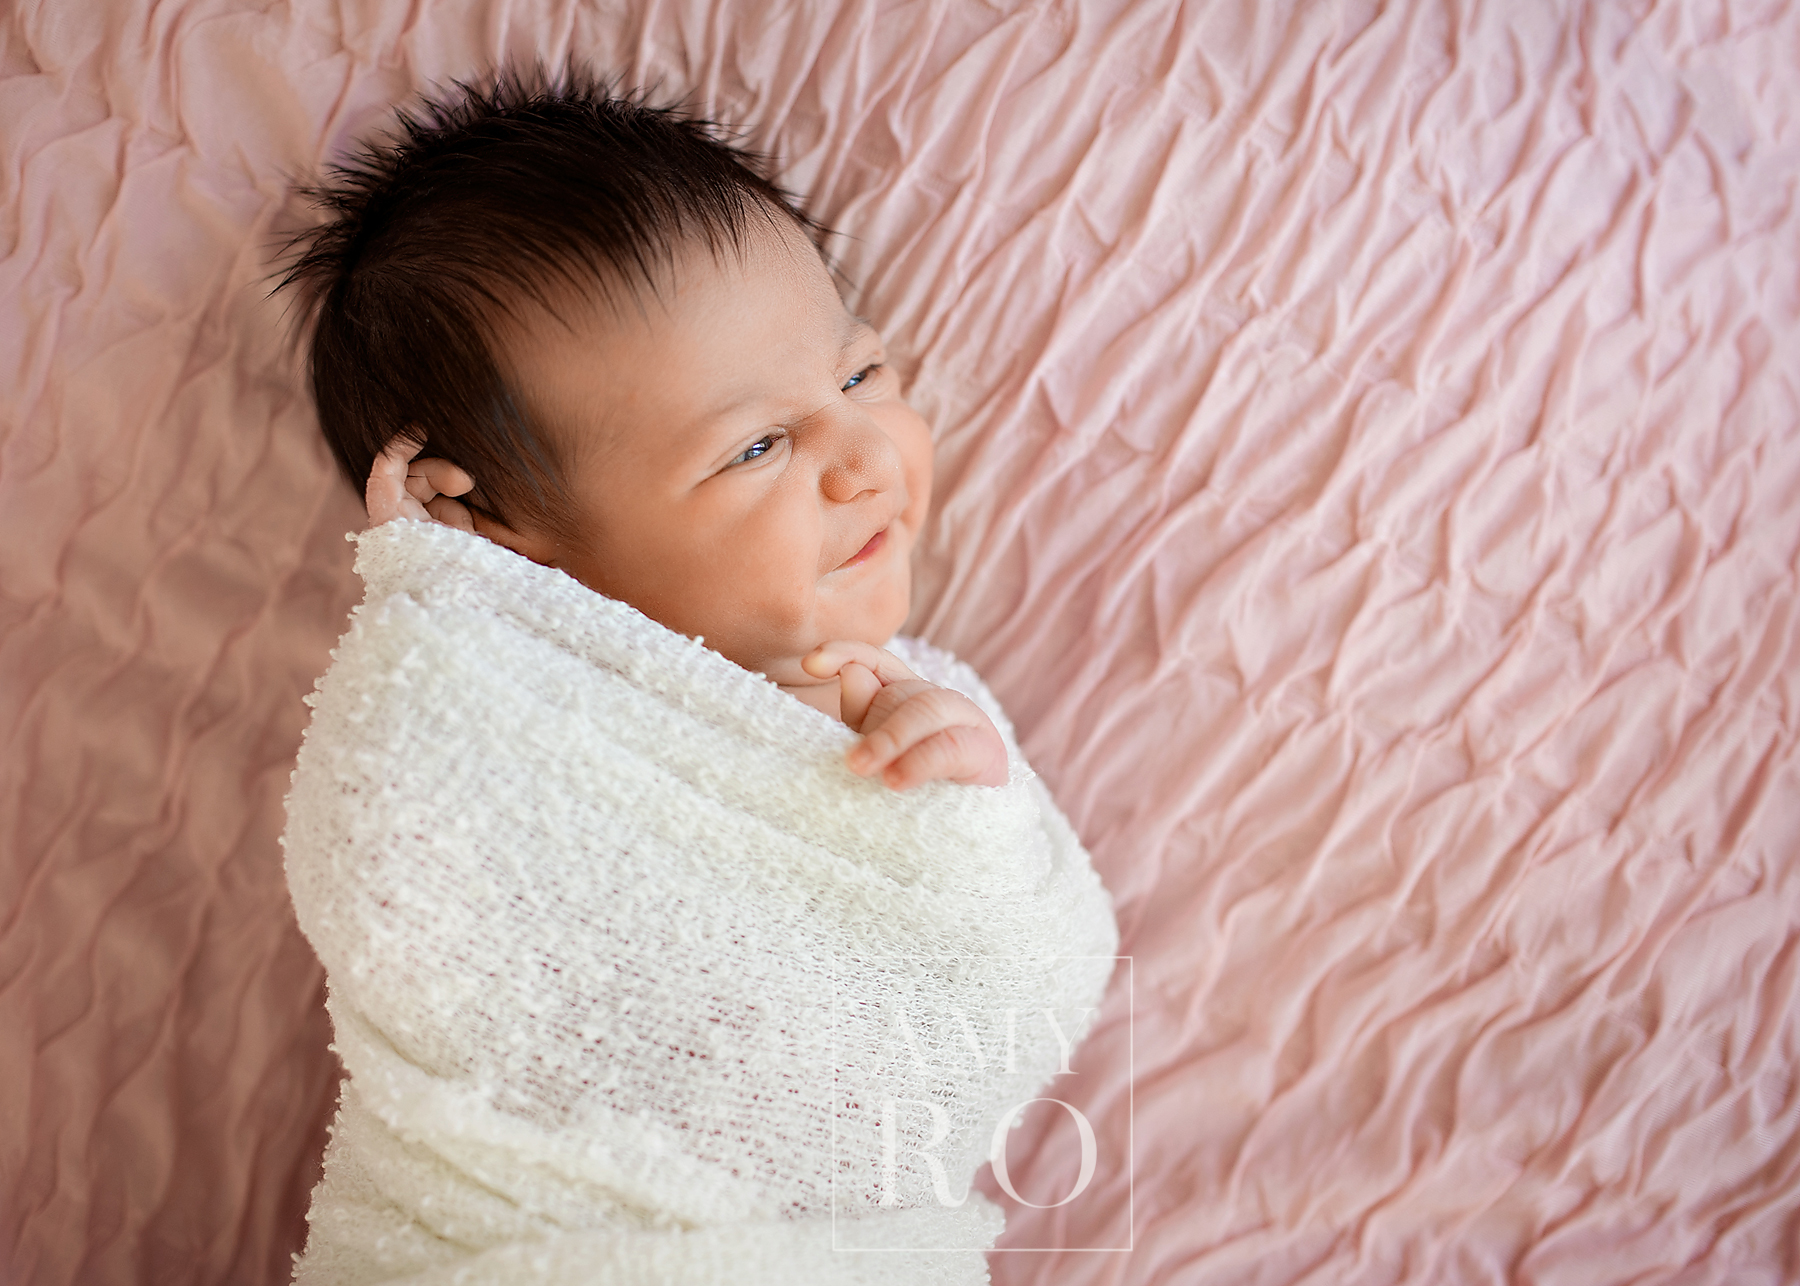 Newborn baby girl swaddled in ivory on a pink blanket smiling during newborn session near Massachusetts